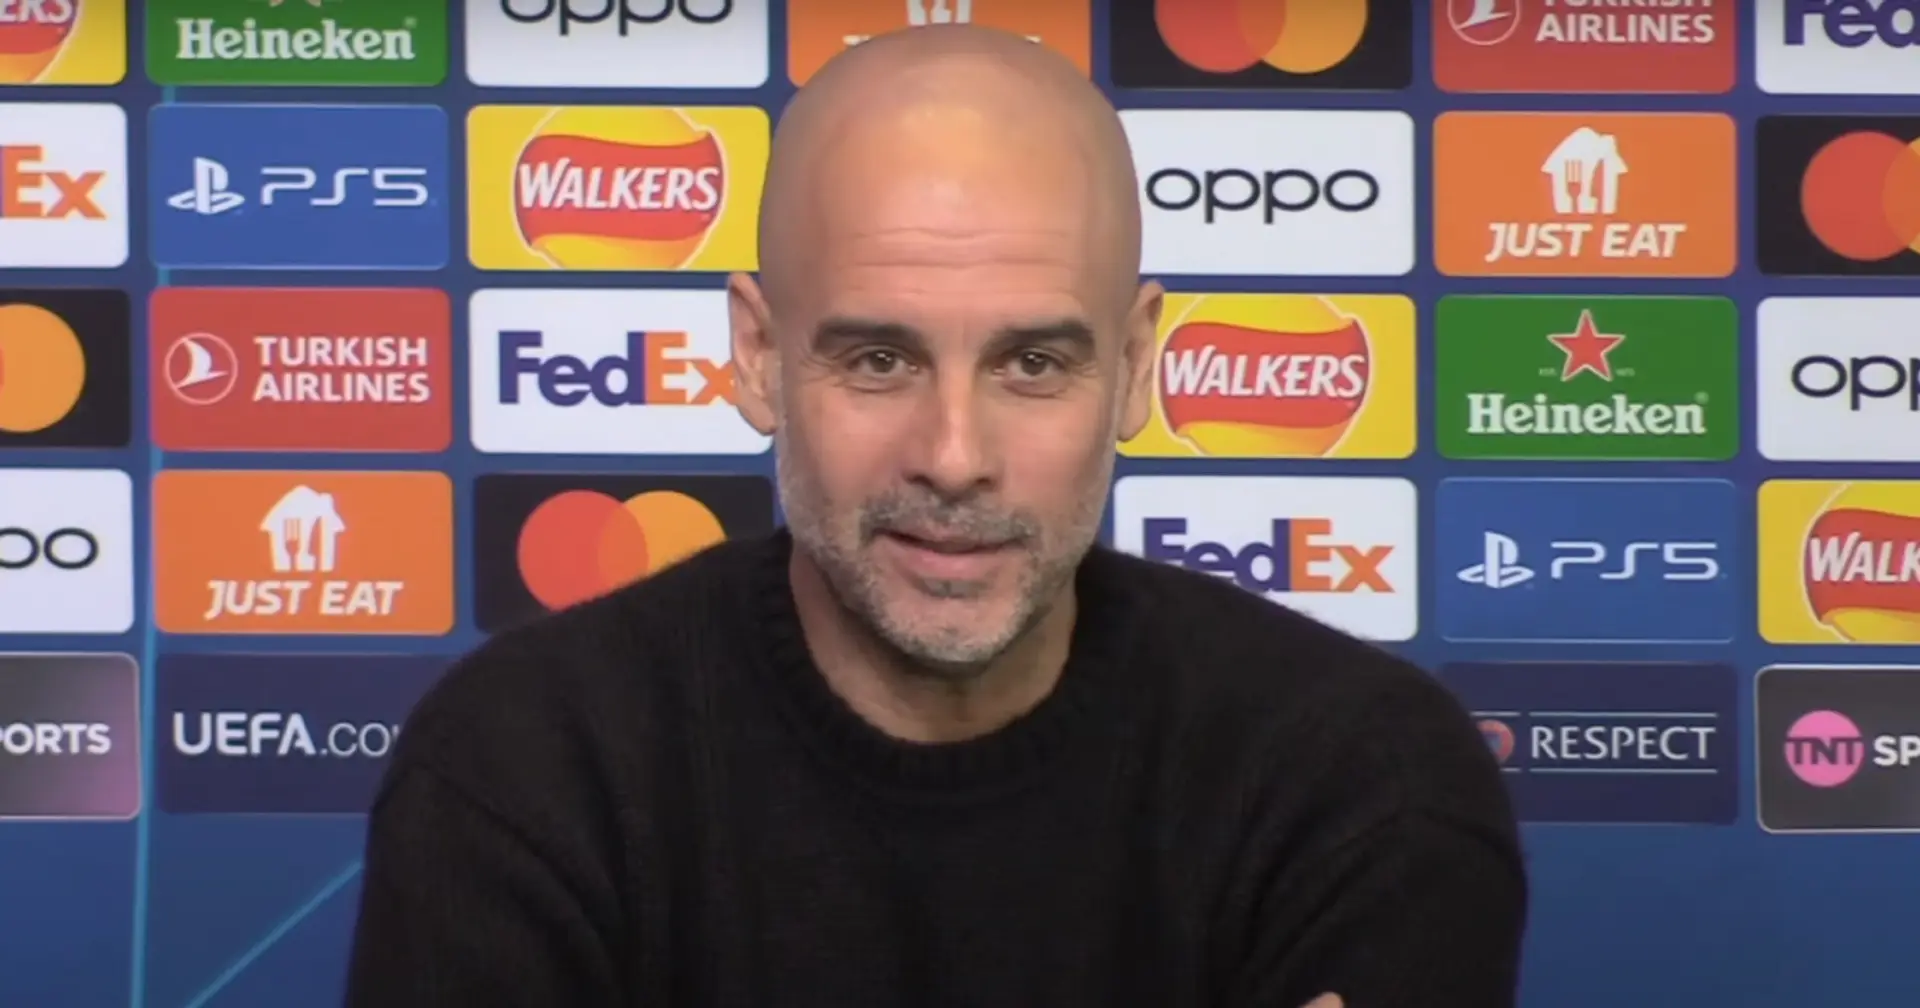 'Hats off, chapeau, incredible': Pep Guardiola reveals what result he considers to be success for Man City this season